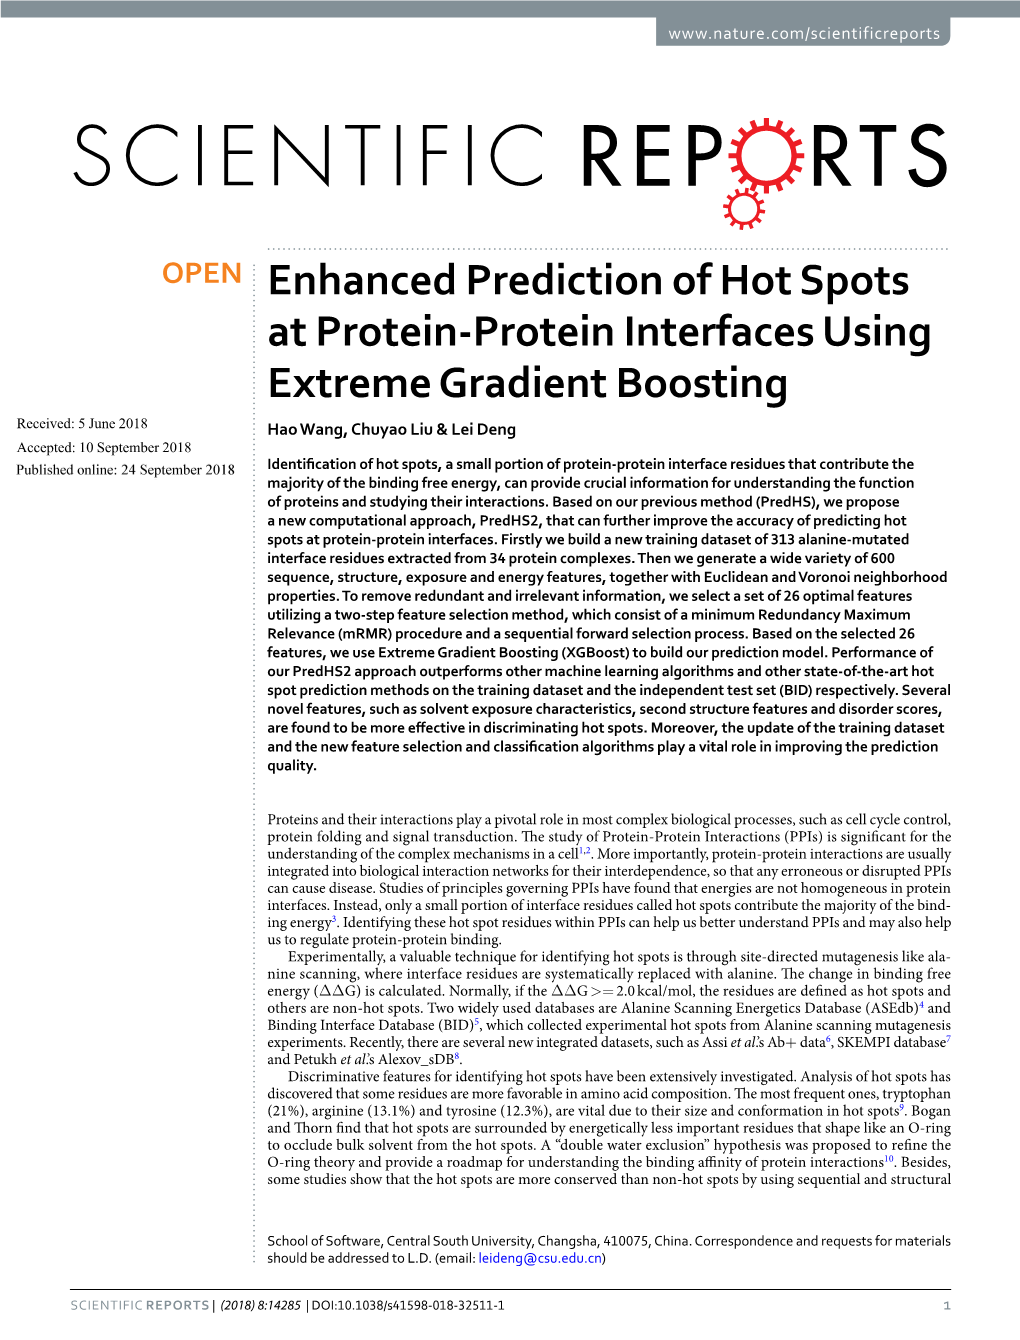 Enhanced Prediction of Hot Spots at Protein-Protein Interfaces Using Extreme Gradient Boosting